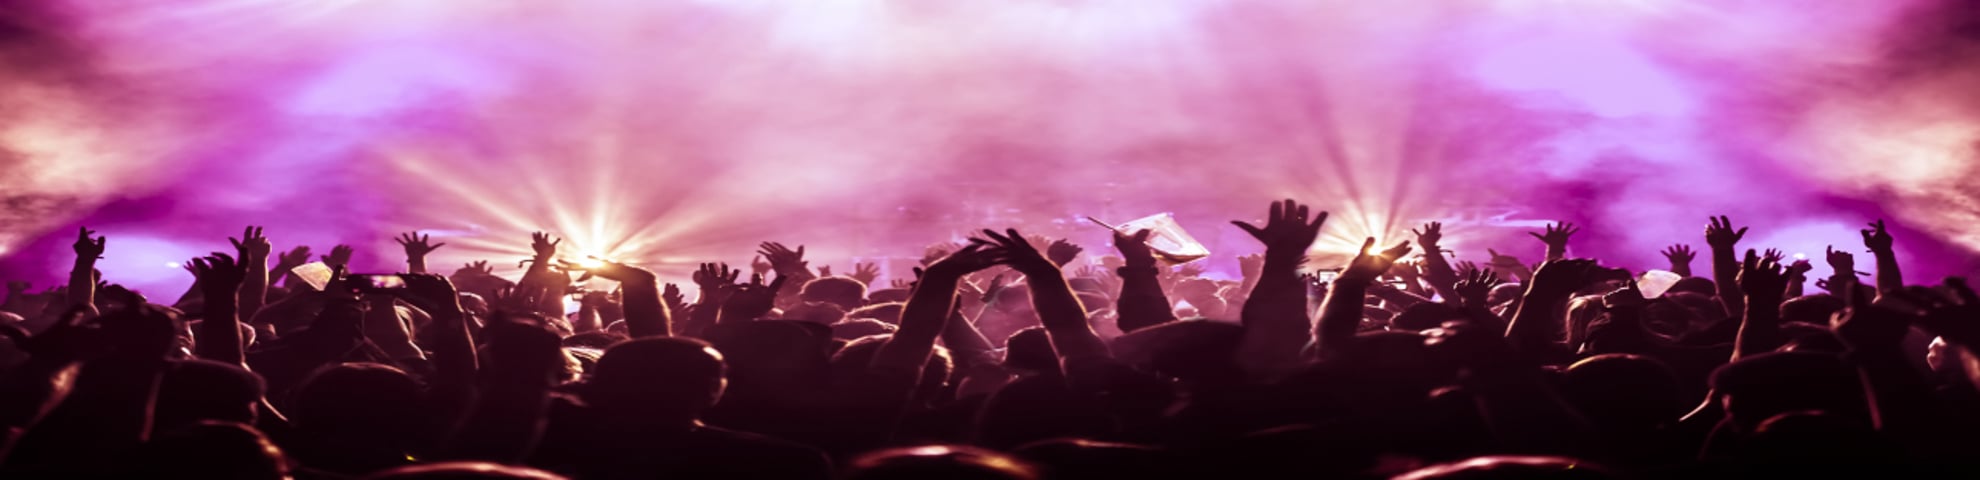 Crowd enjoying a concert with pink lighting and smoke, with their hands in the air 